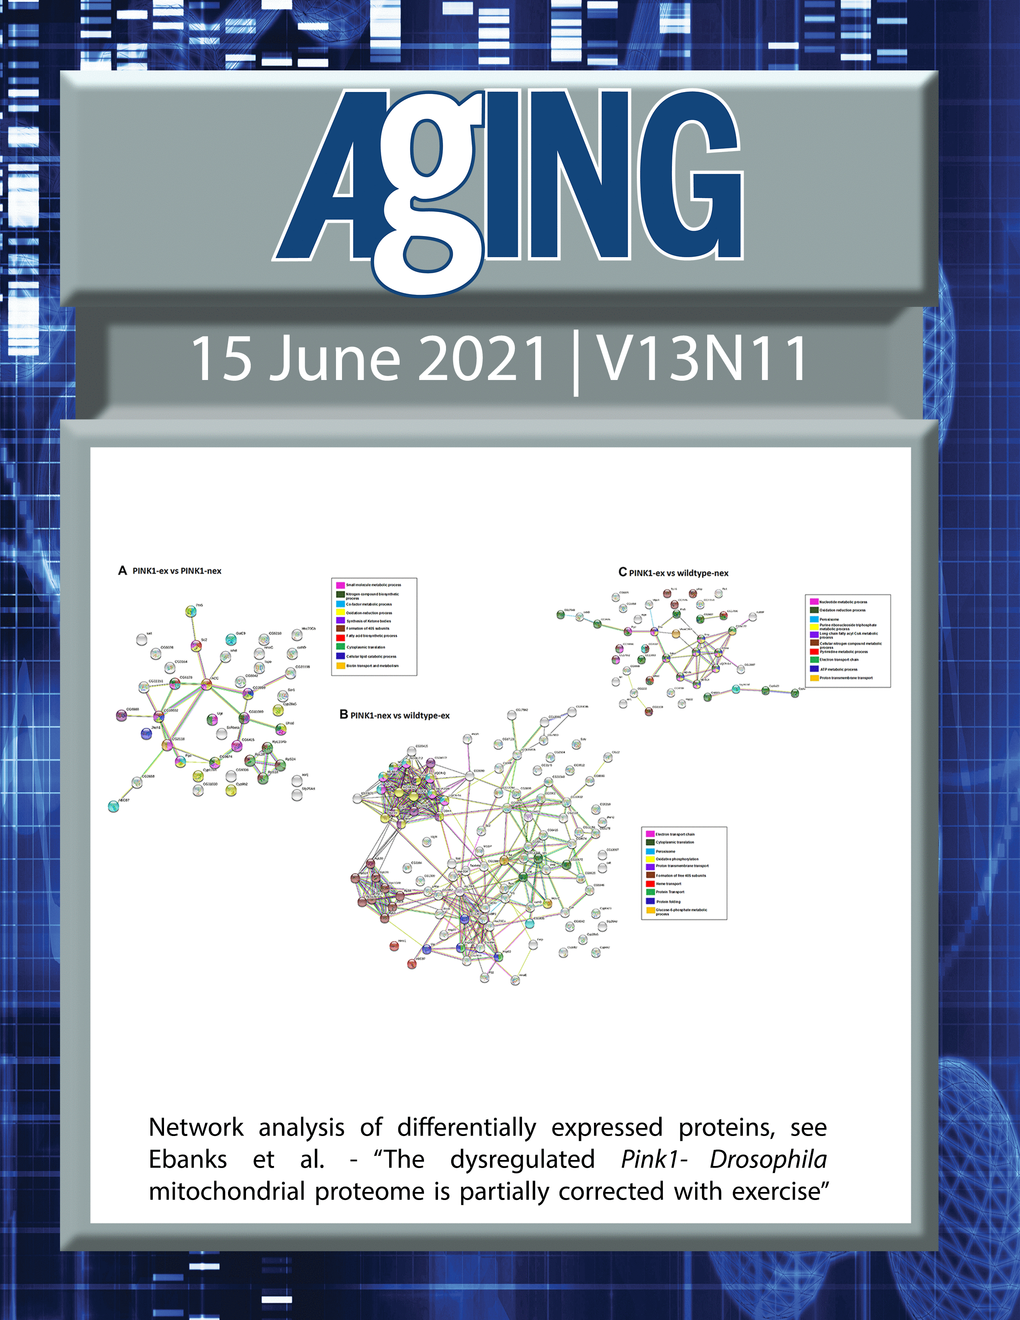 The cover features Figure 6 "Network analysis of differentially expressed proteins“ from Ebanks et al.